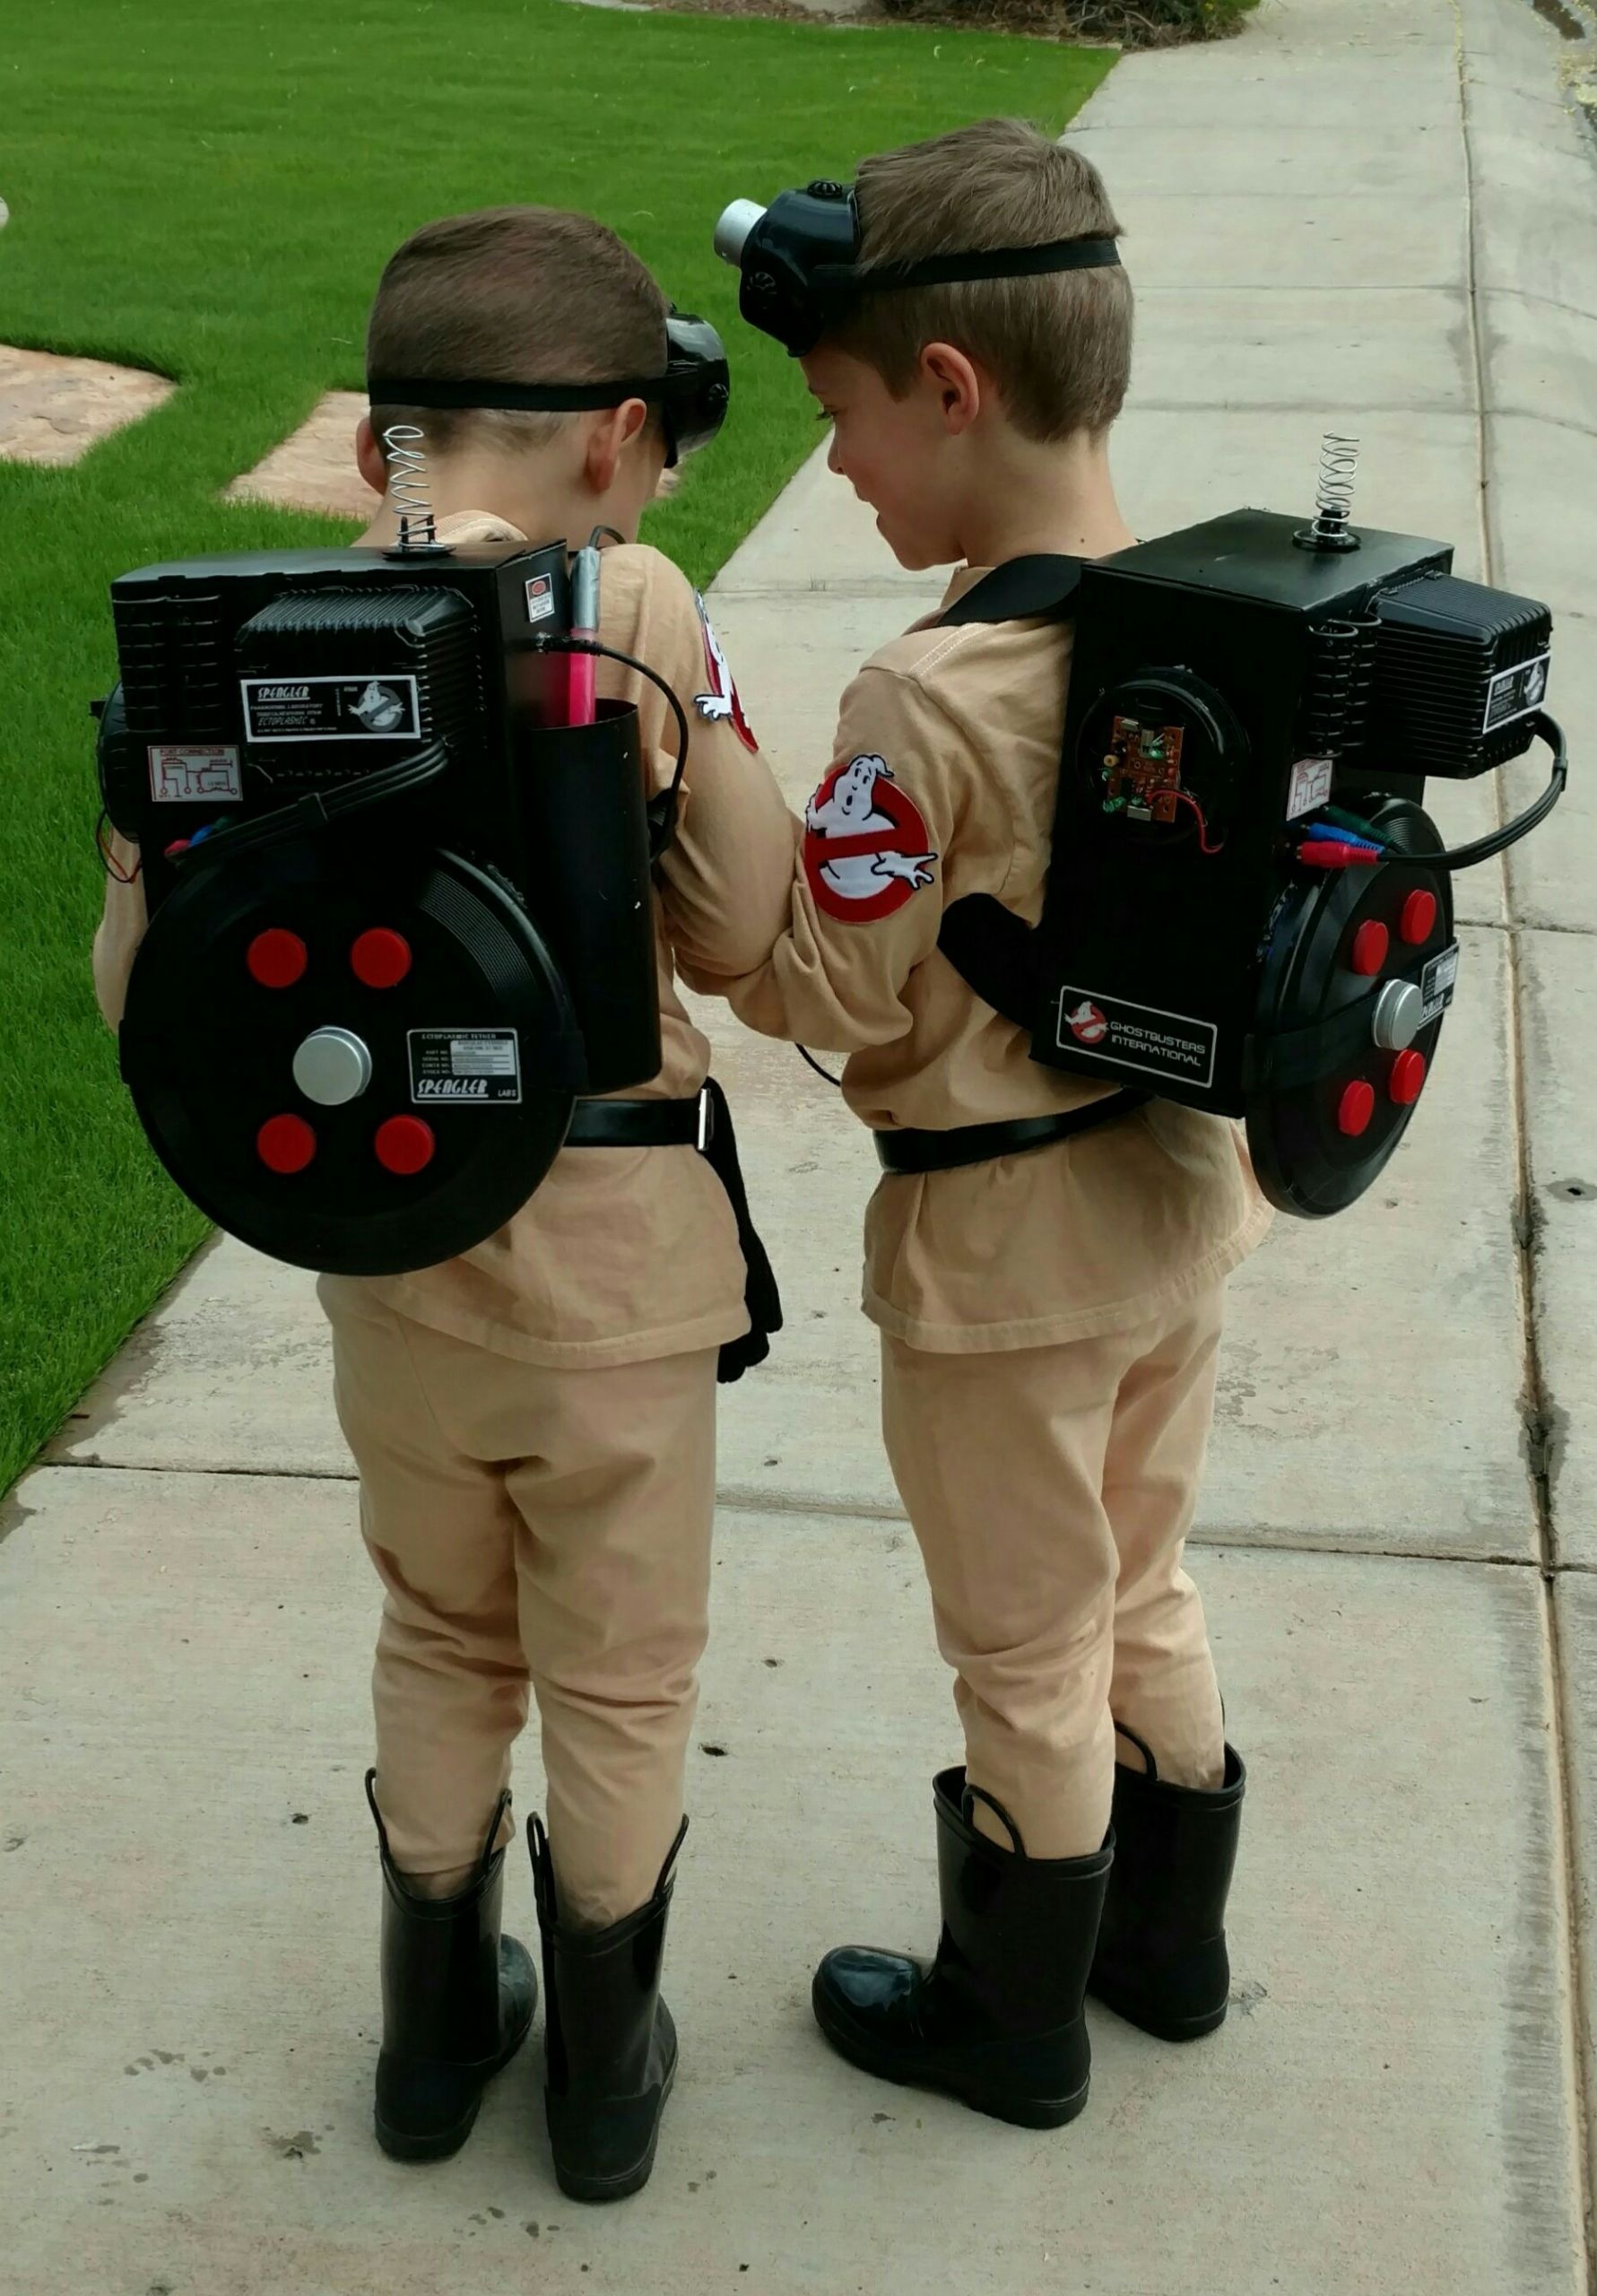 DIY Kids Ghostbuster Costume
 DIY Ghostbusters Costumes for Twins Costume Yeti